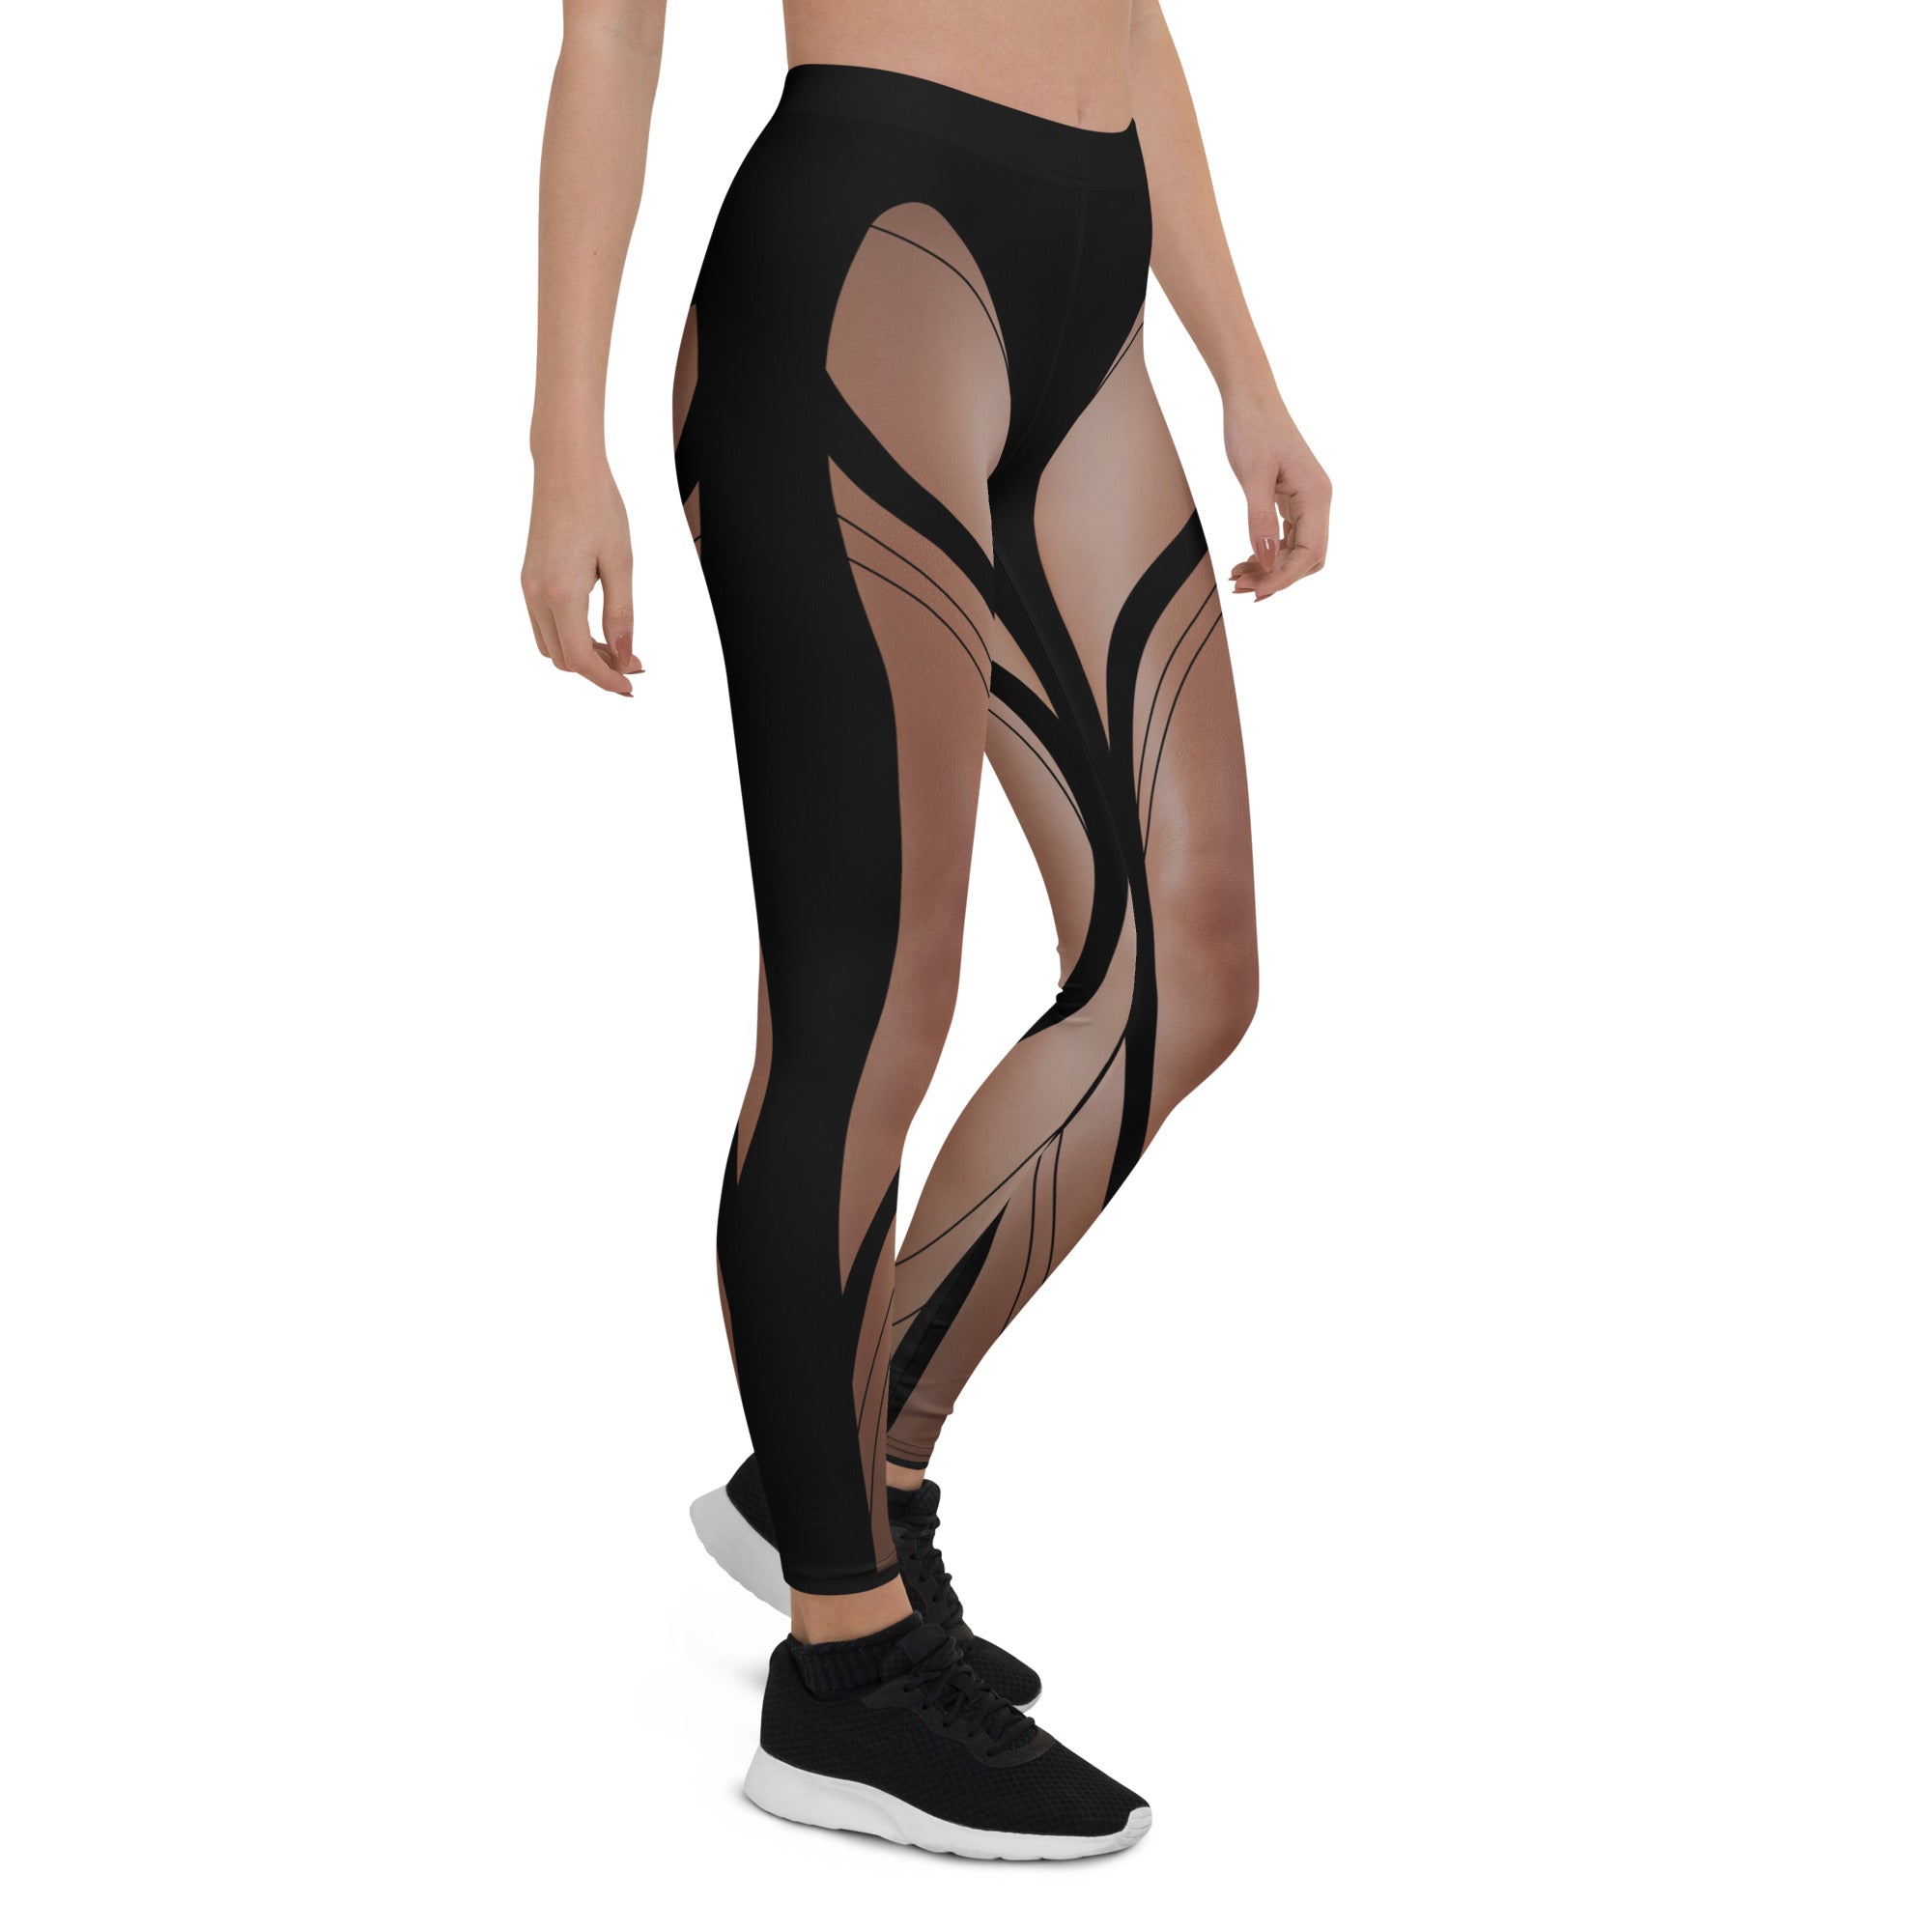 Women's Nude Sports Leggings Skin Tight With BS Print